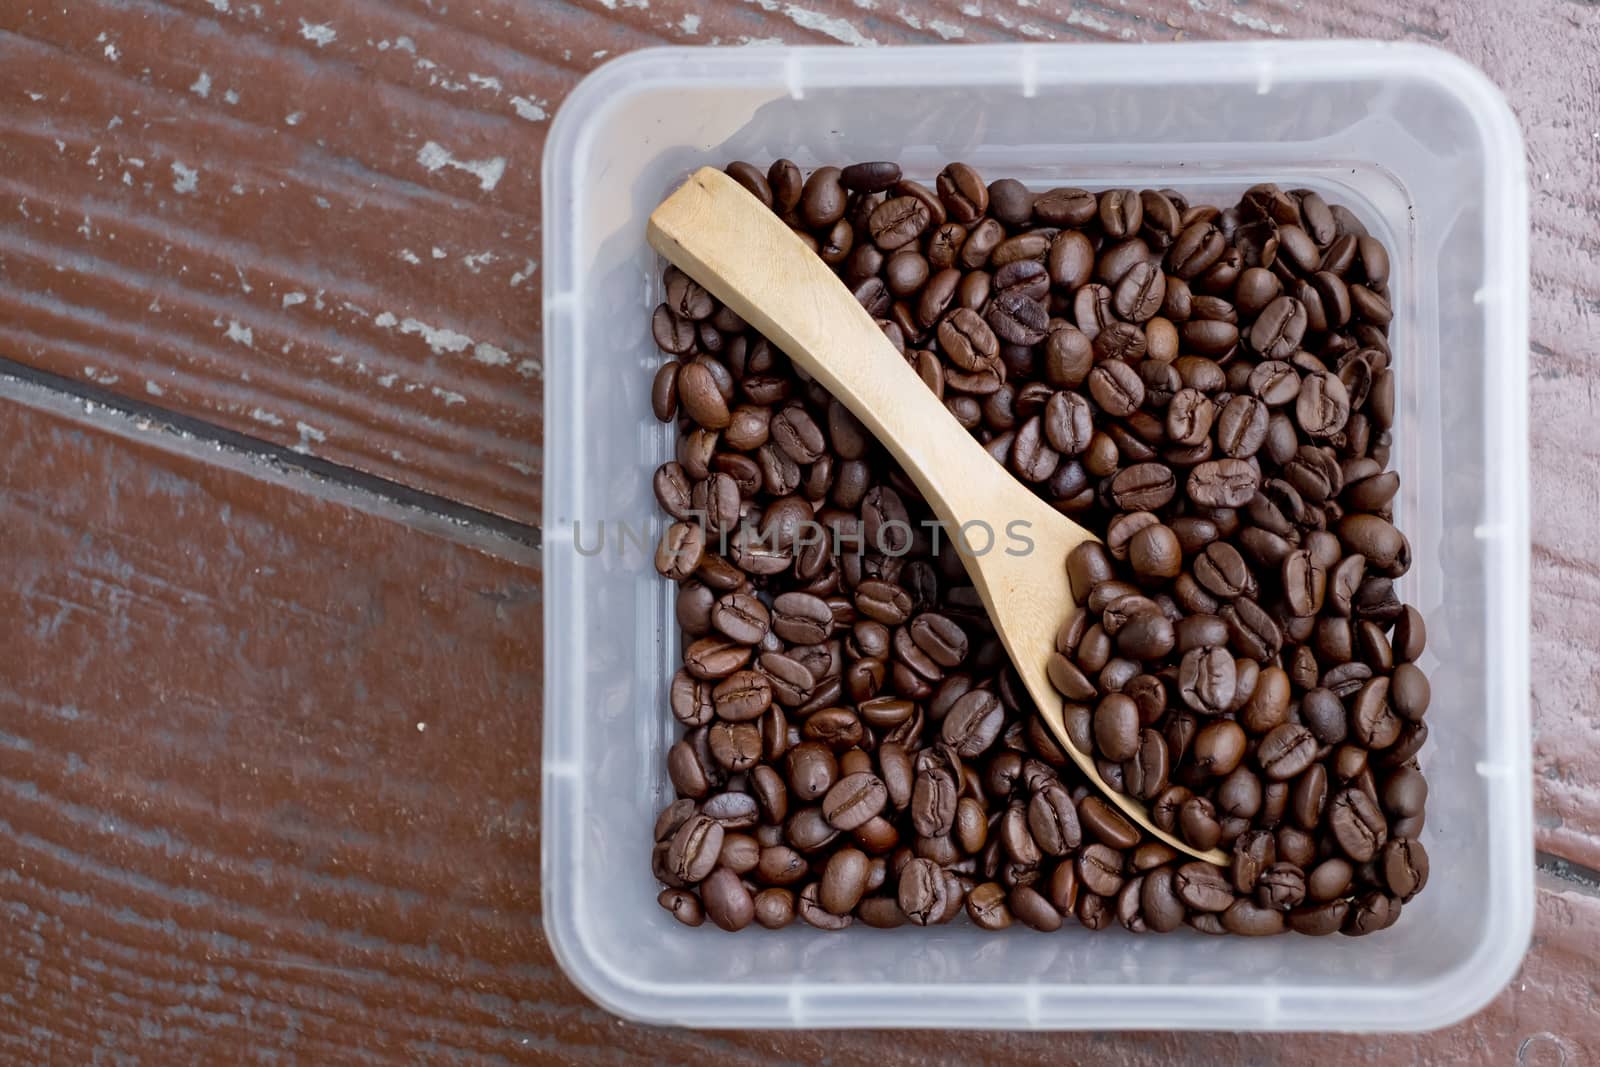 Coffee beans, square shaped box with wooden spoon. Wooden surface.